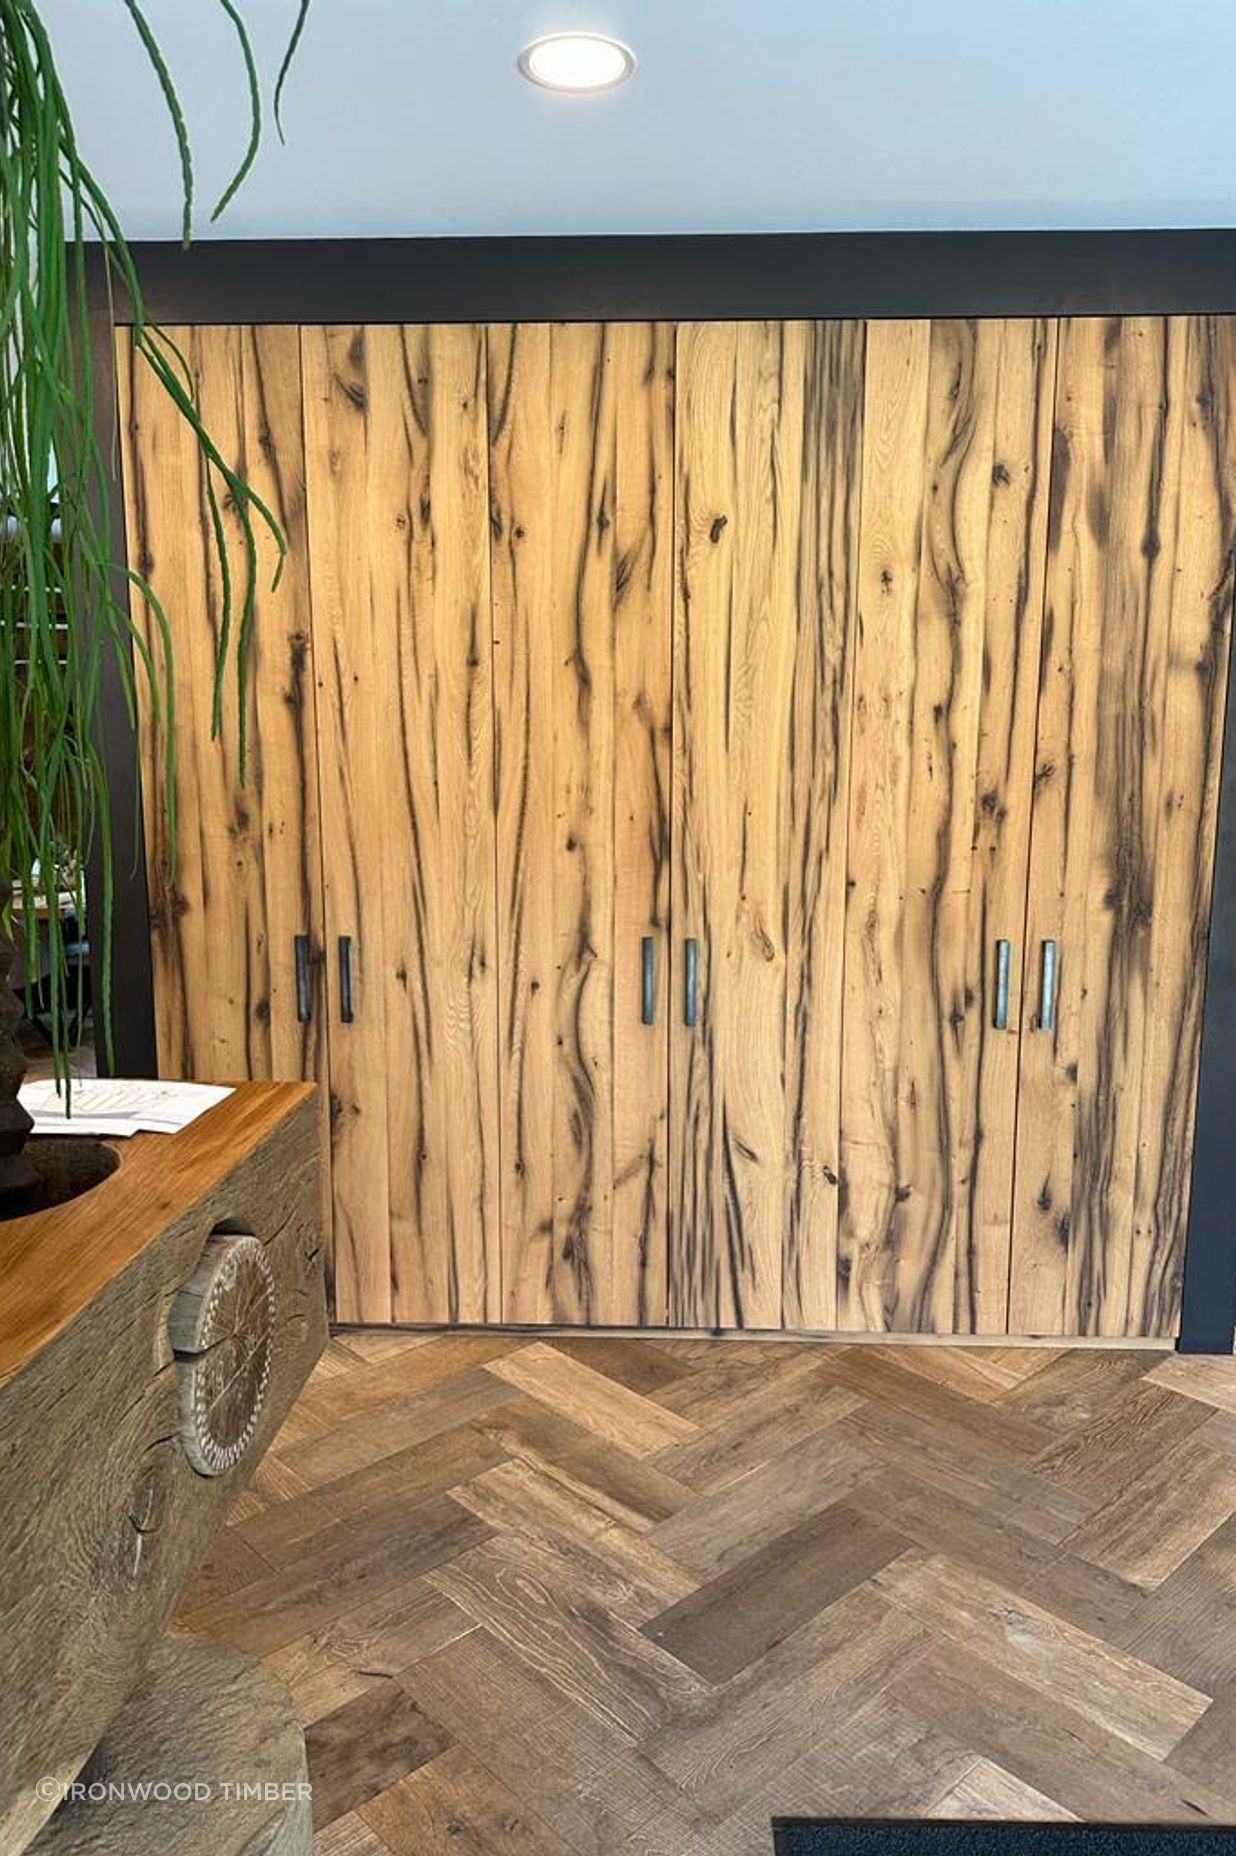 Recycled timber creates stunning interior features